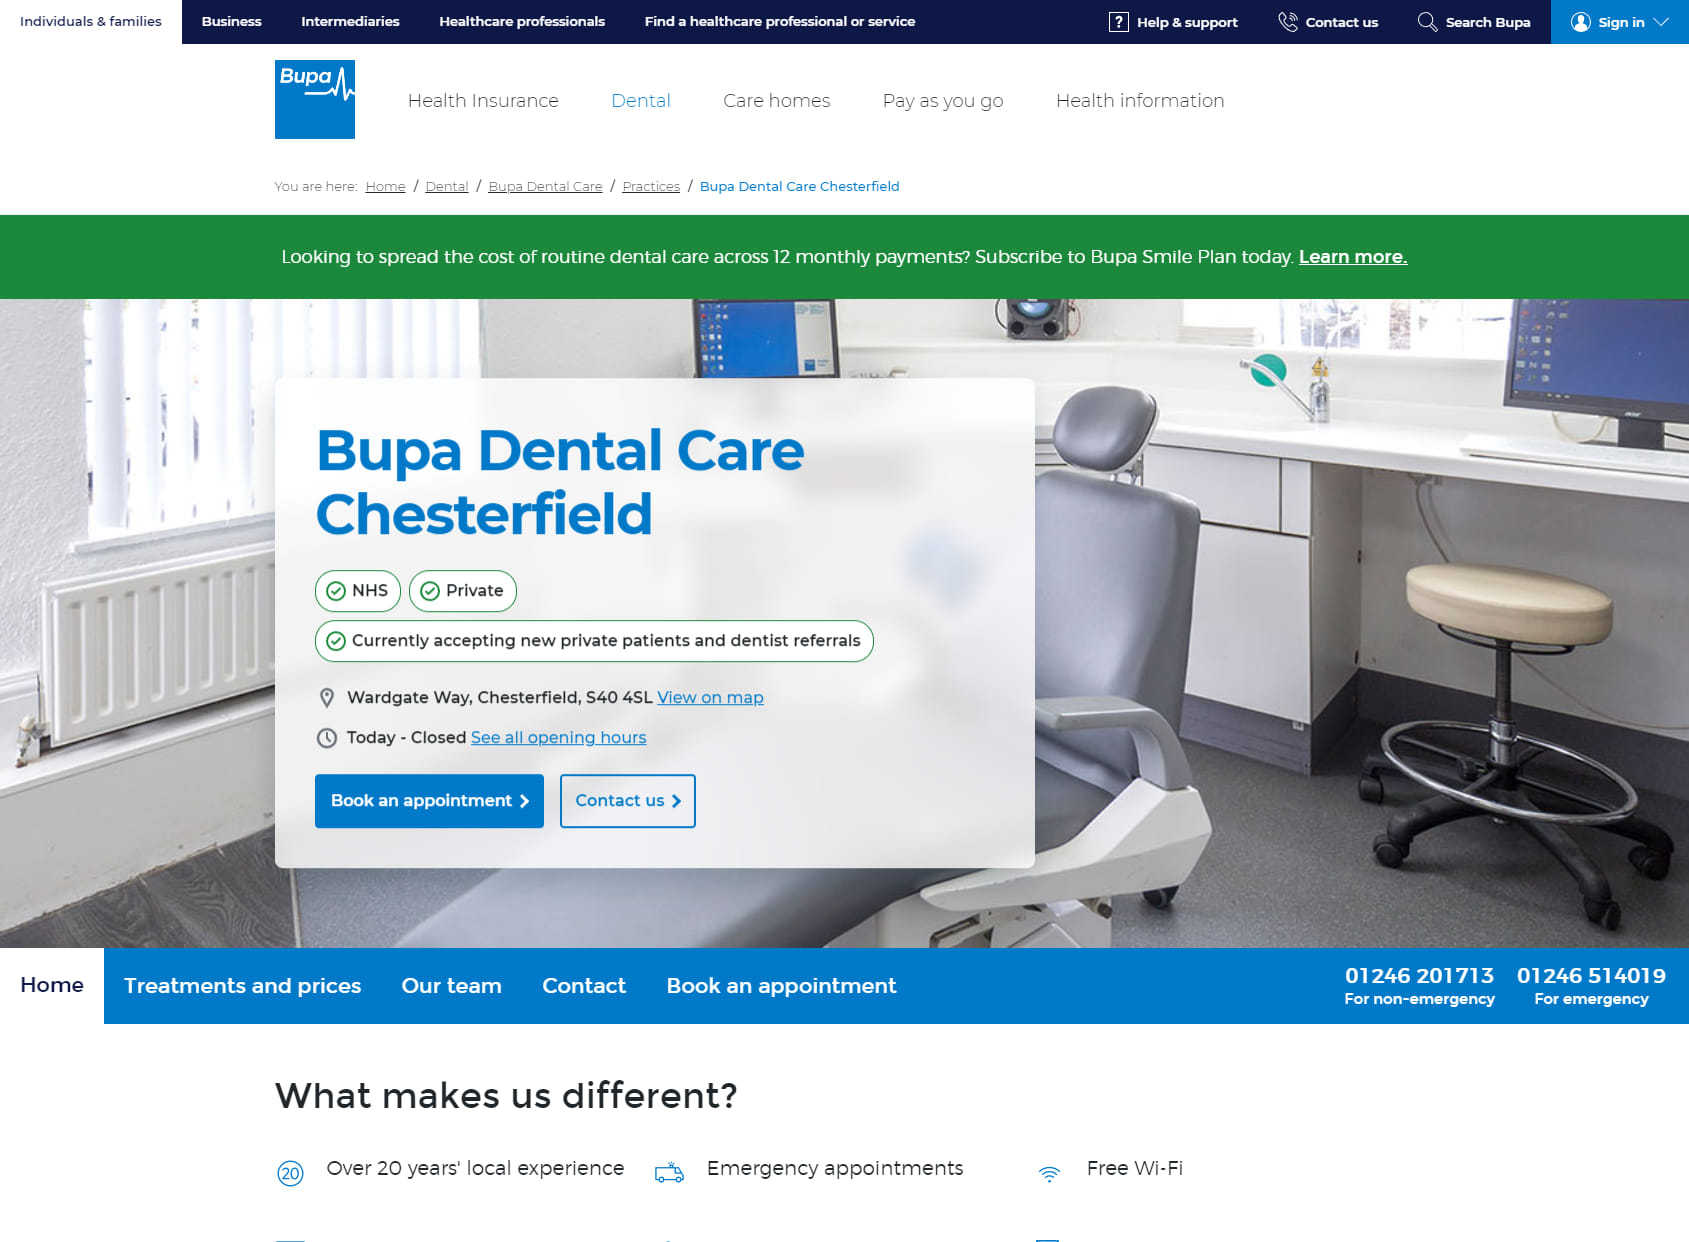 Bupa Dental Care Chesterfield